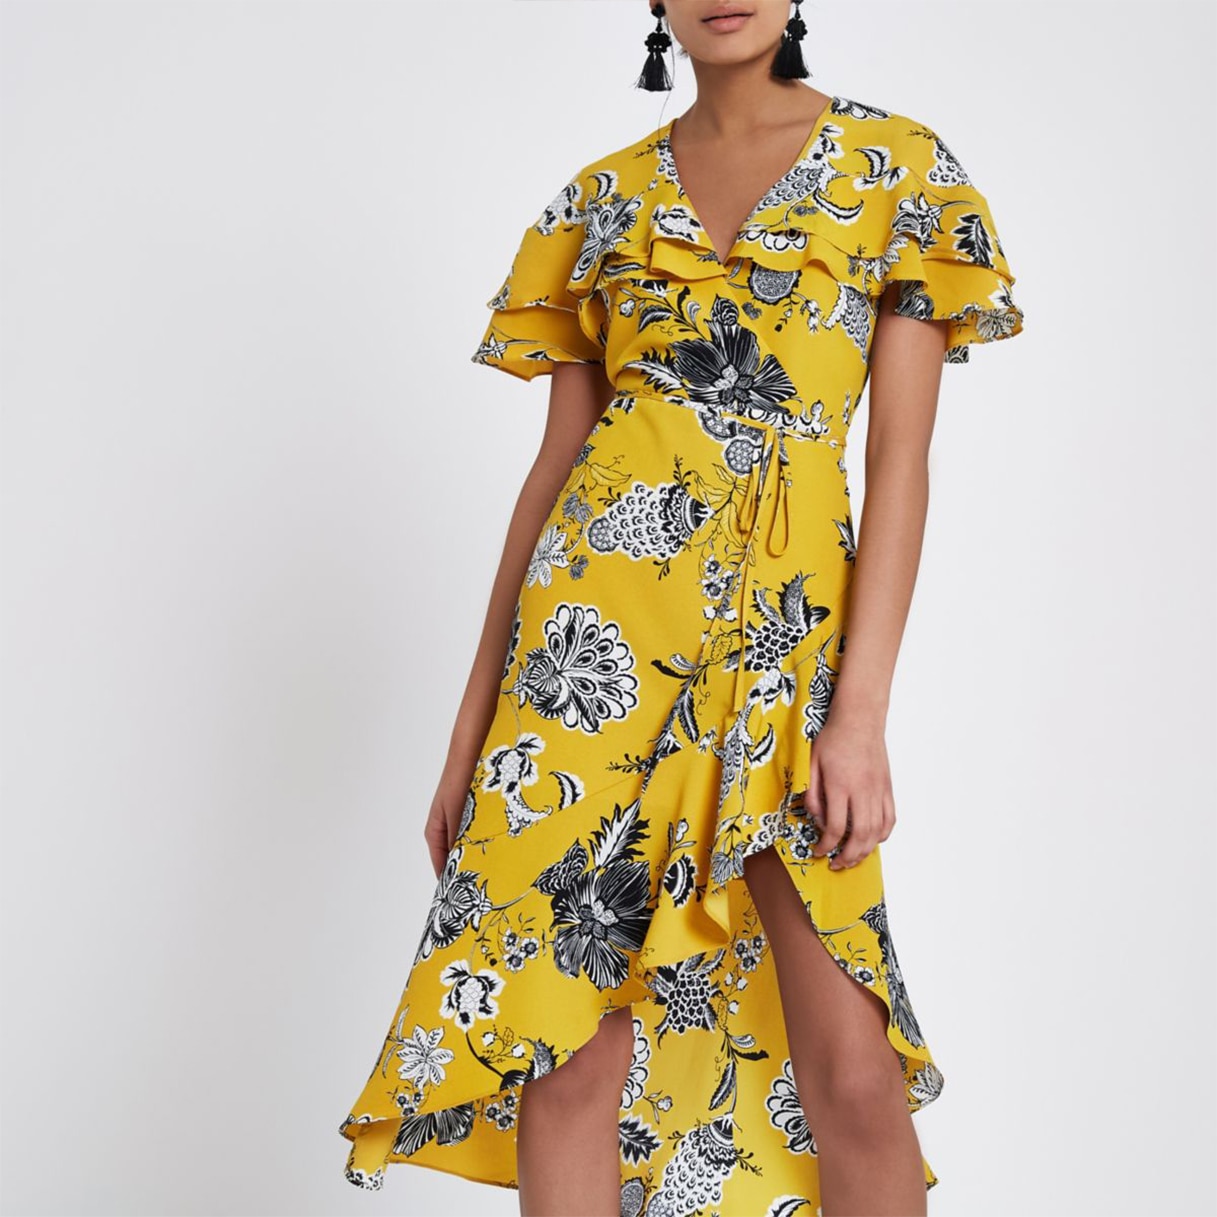 Best Stylish Spring Wedding Guest Dresses Under $150 | The Daily Dish